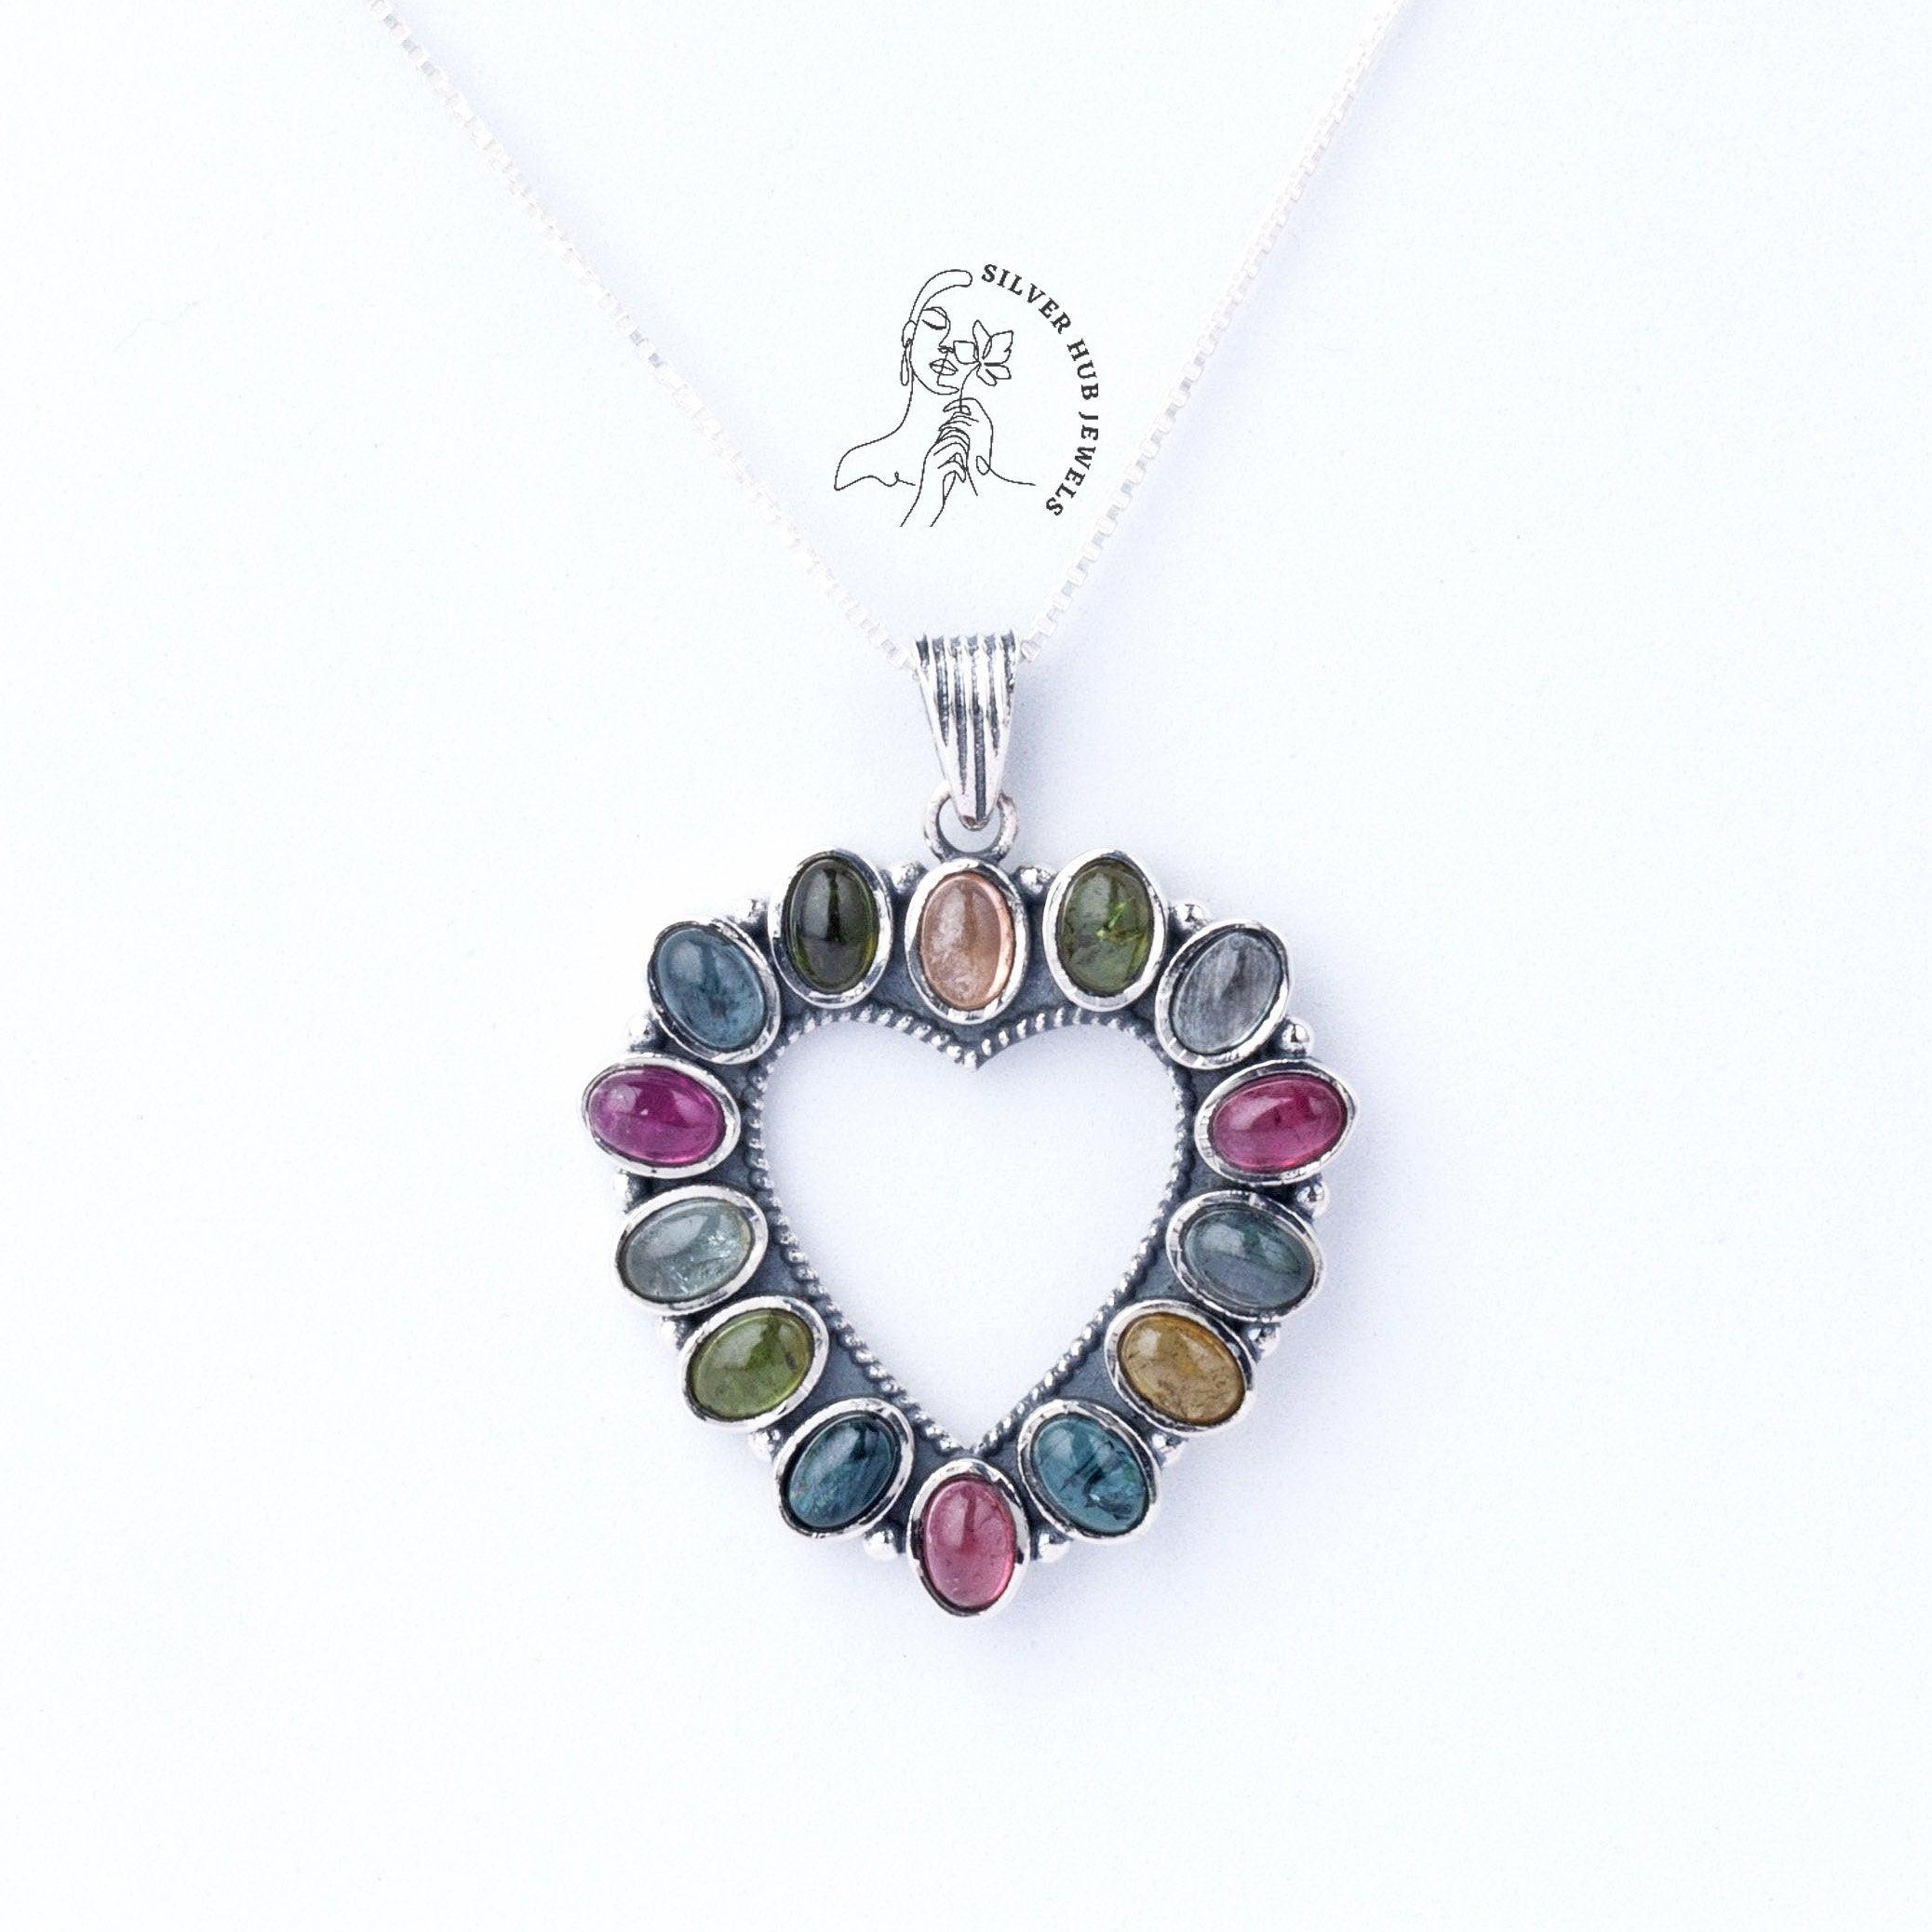 Gemstone Heart Shaped Tourmaline Opal Sterling Silver Necklace | Dainty Necklace | Valentines Day Gift |Gift For Her | Bridemaids Gift - Silverhubjewels